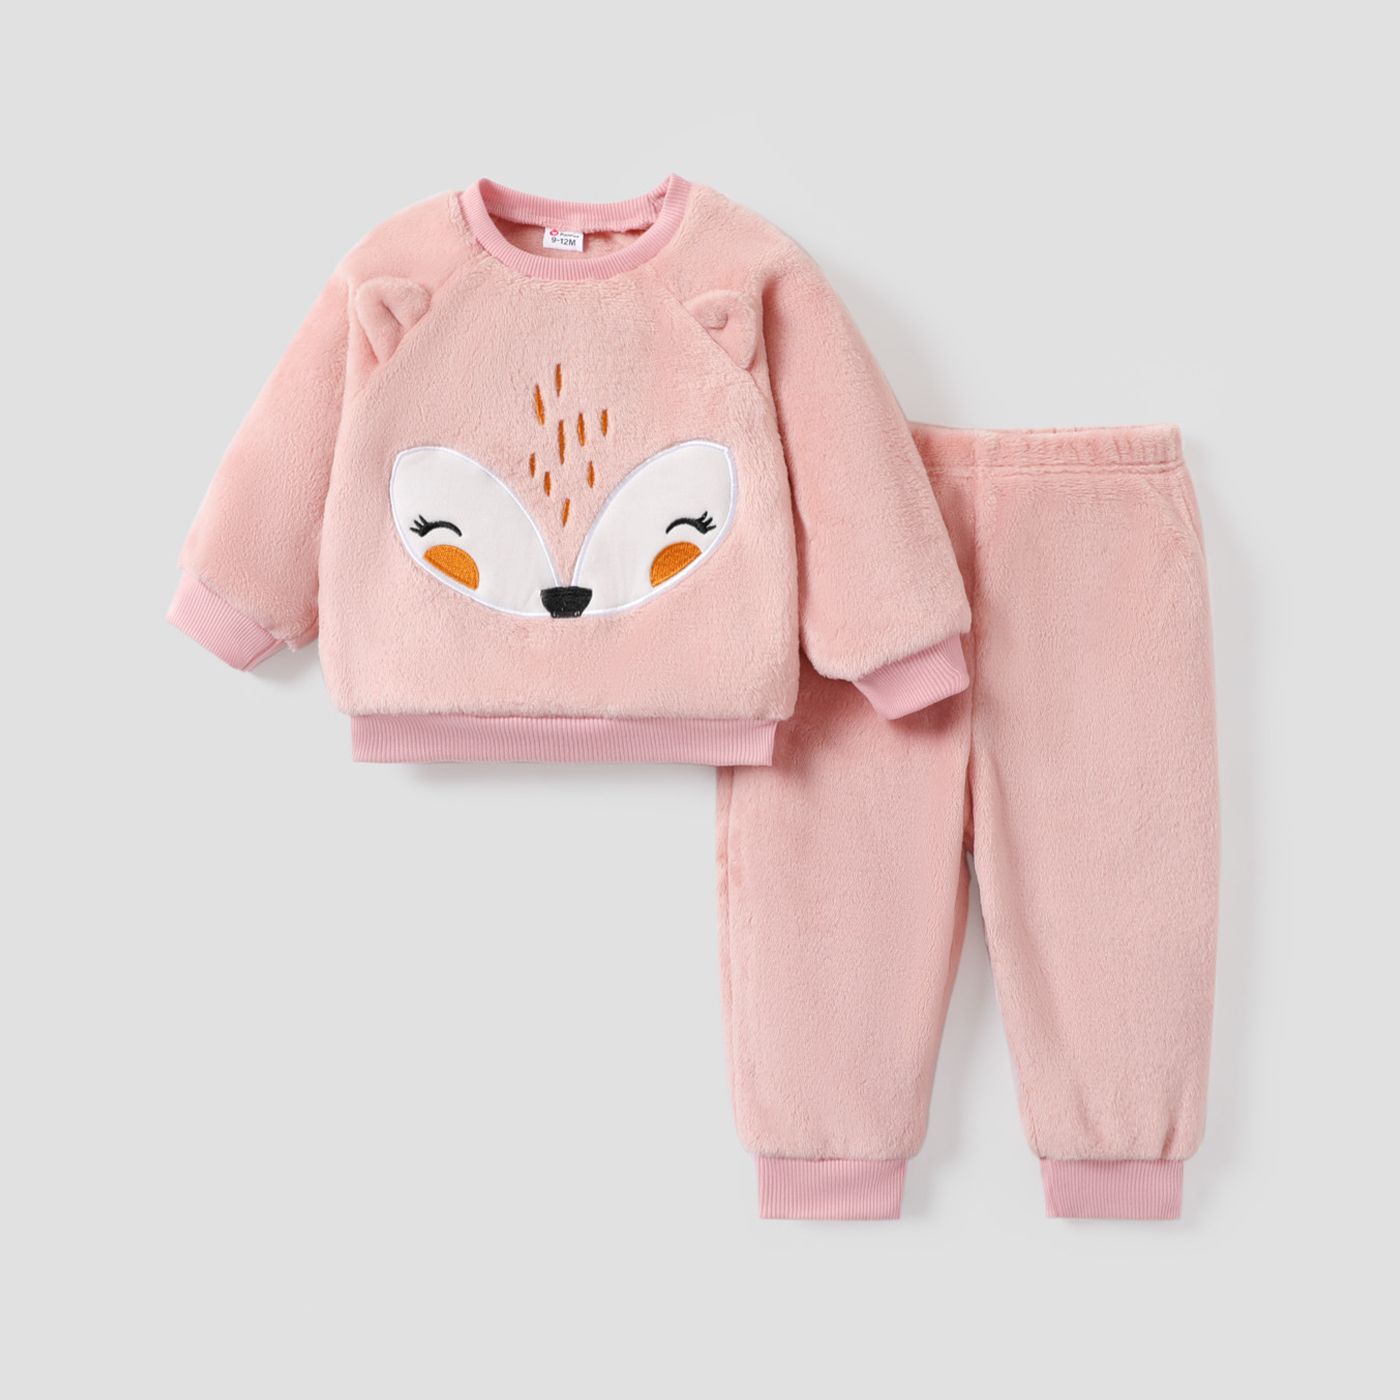 2pcs Baby Girl Fox Ears Design Embroidered Fleece Long-sleeve Pullover and Pants Set